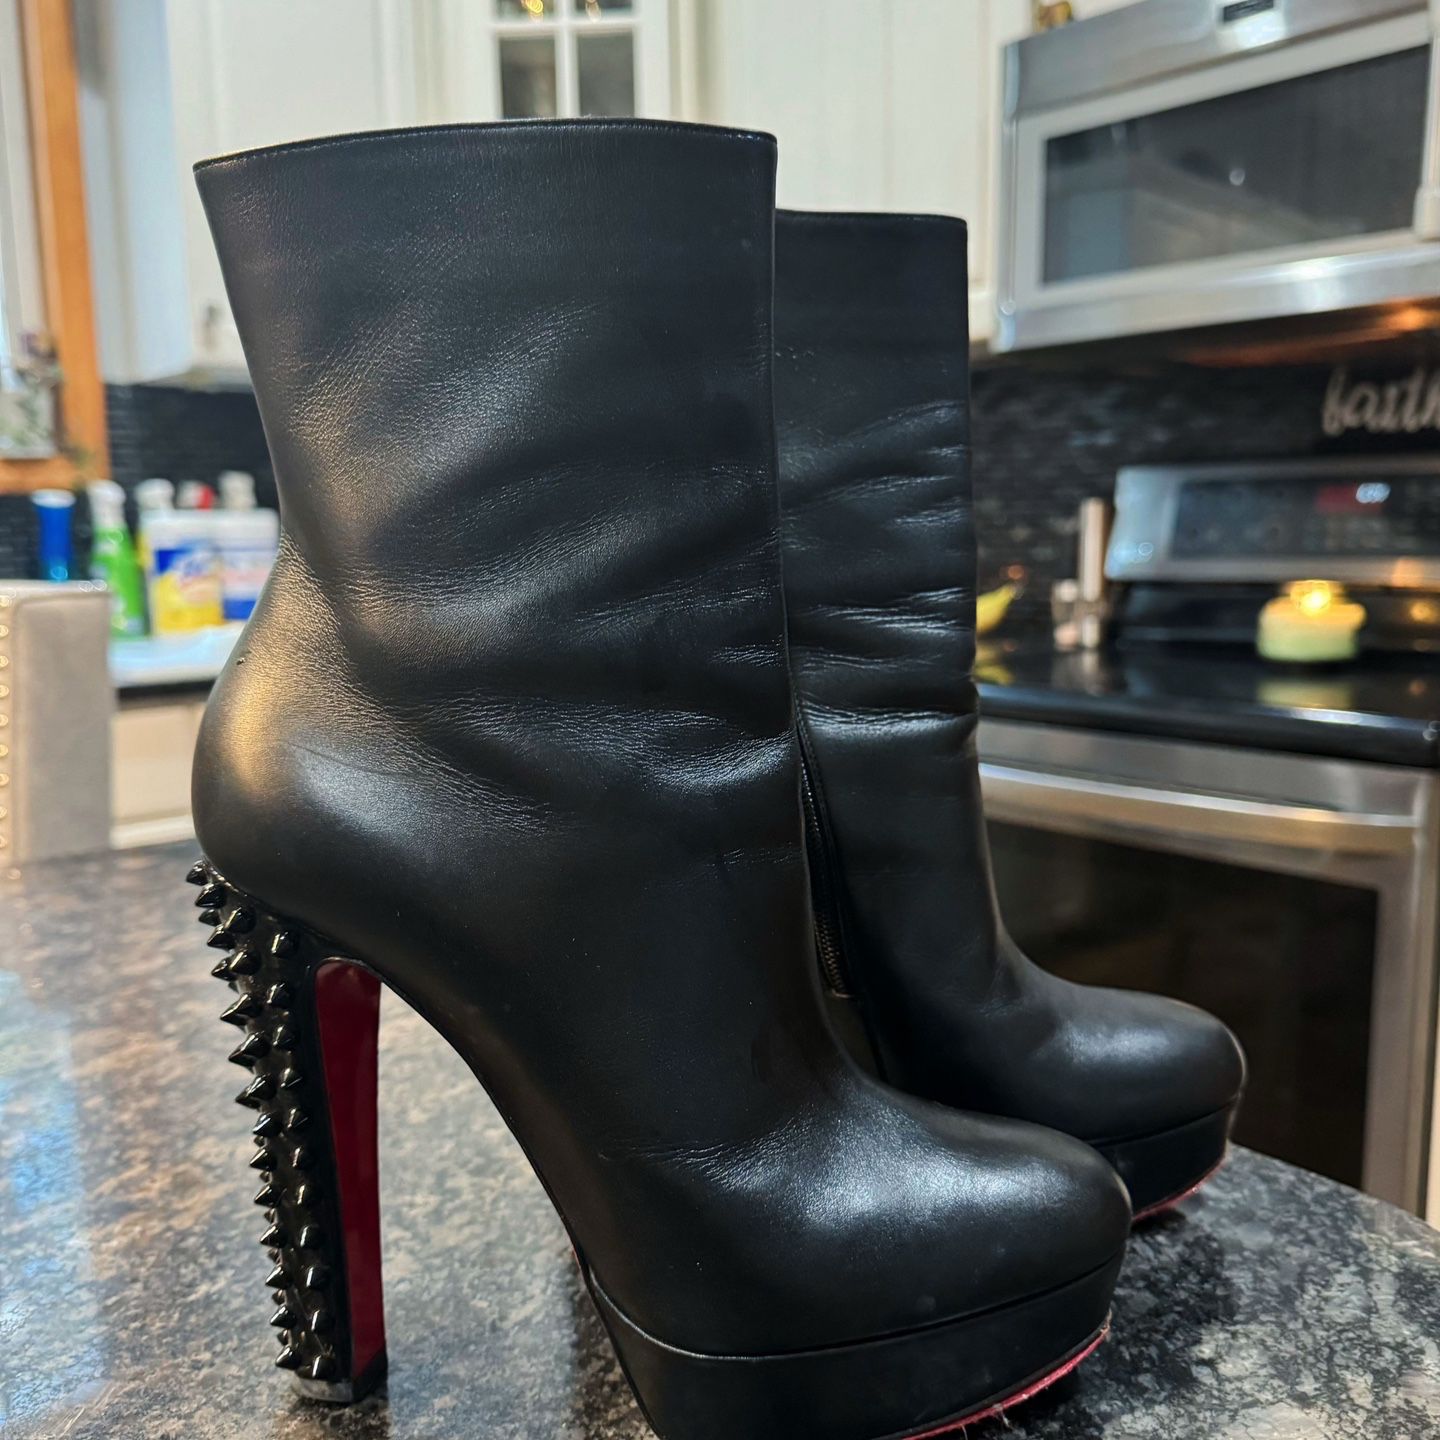 Christian Louboutin Taclou 140 Black Leather Stud Heel Ankle Boots